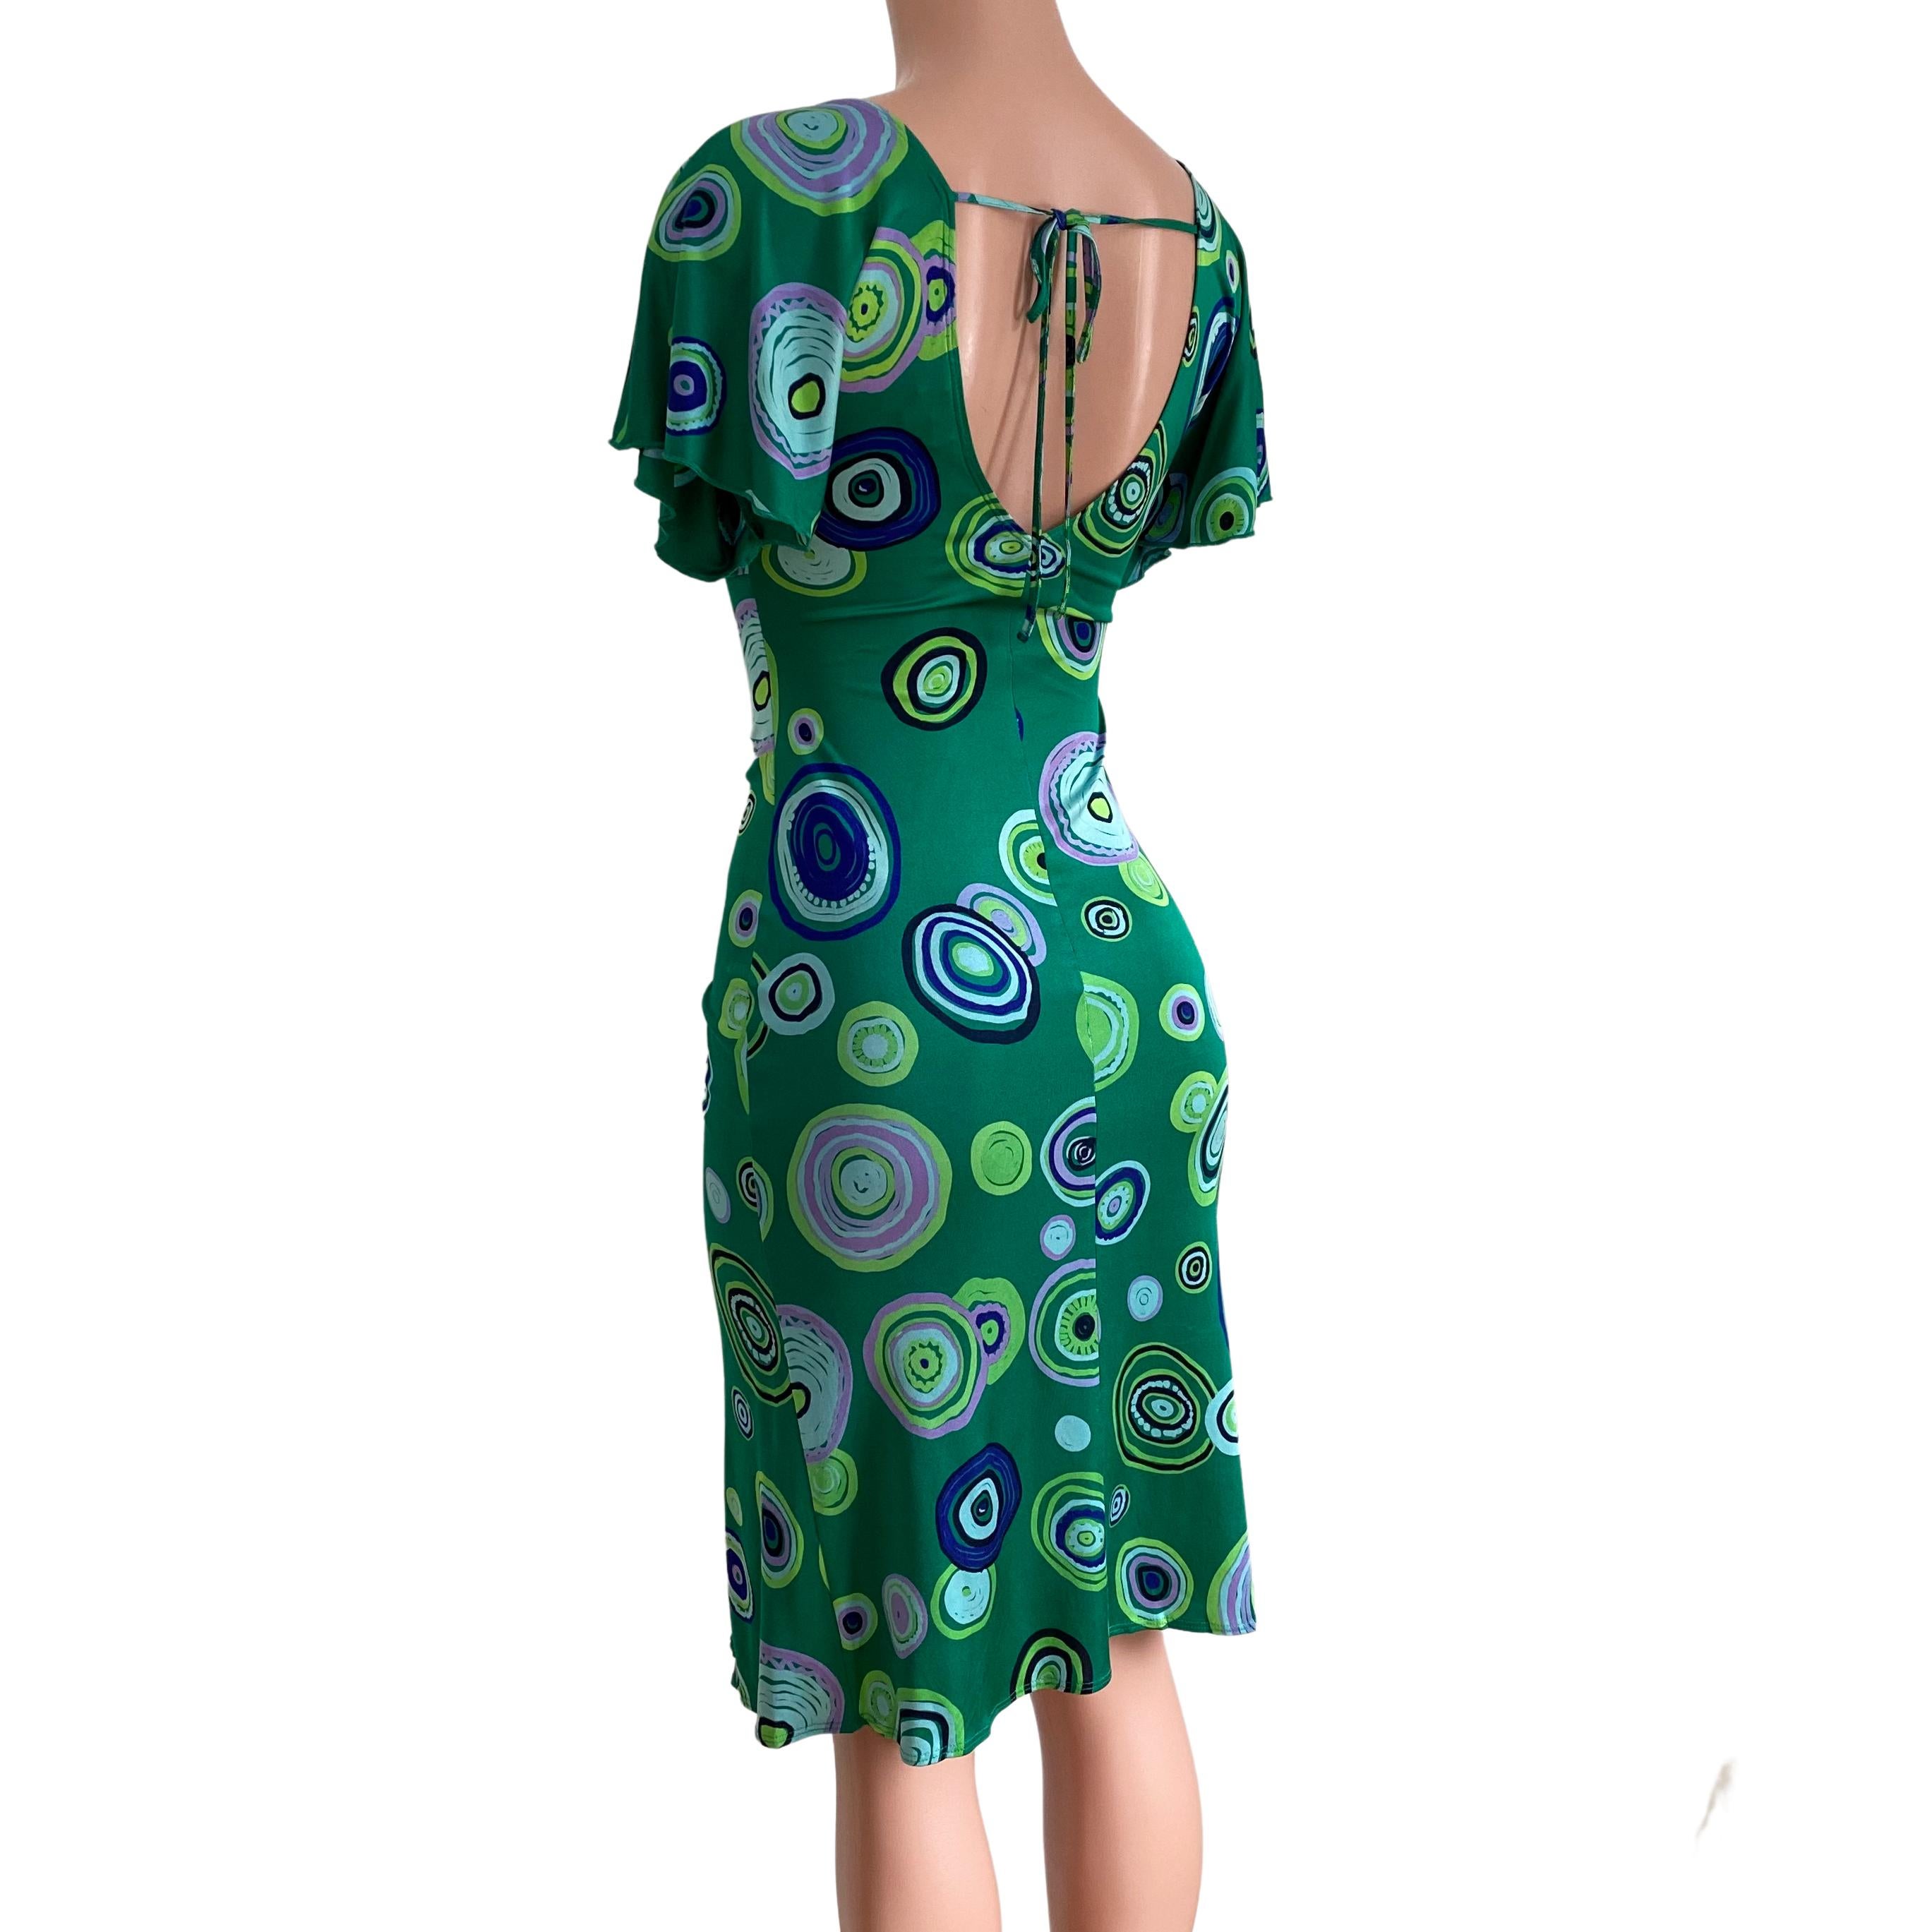 New with tag.
Flattering plunging V-neck, ruched bodice, and fishtail pleat to show off the curves with each movement.
Ties in the back so the dress won't slip off the shoulder.
Material: Long-filament 100% Silk Jersey Knit
US size 2 = UK 6 = FR